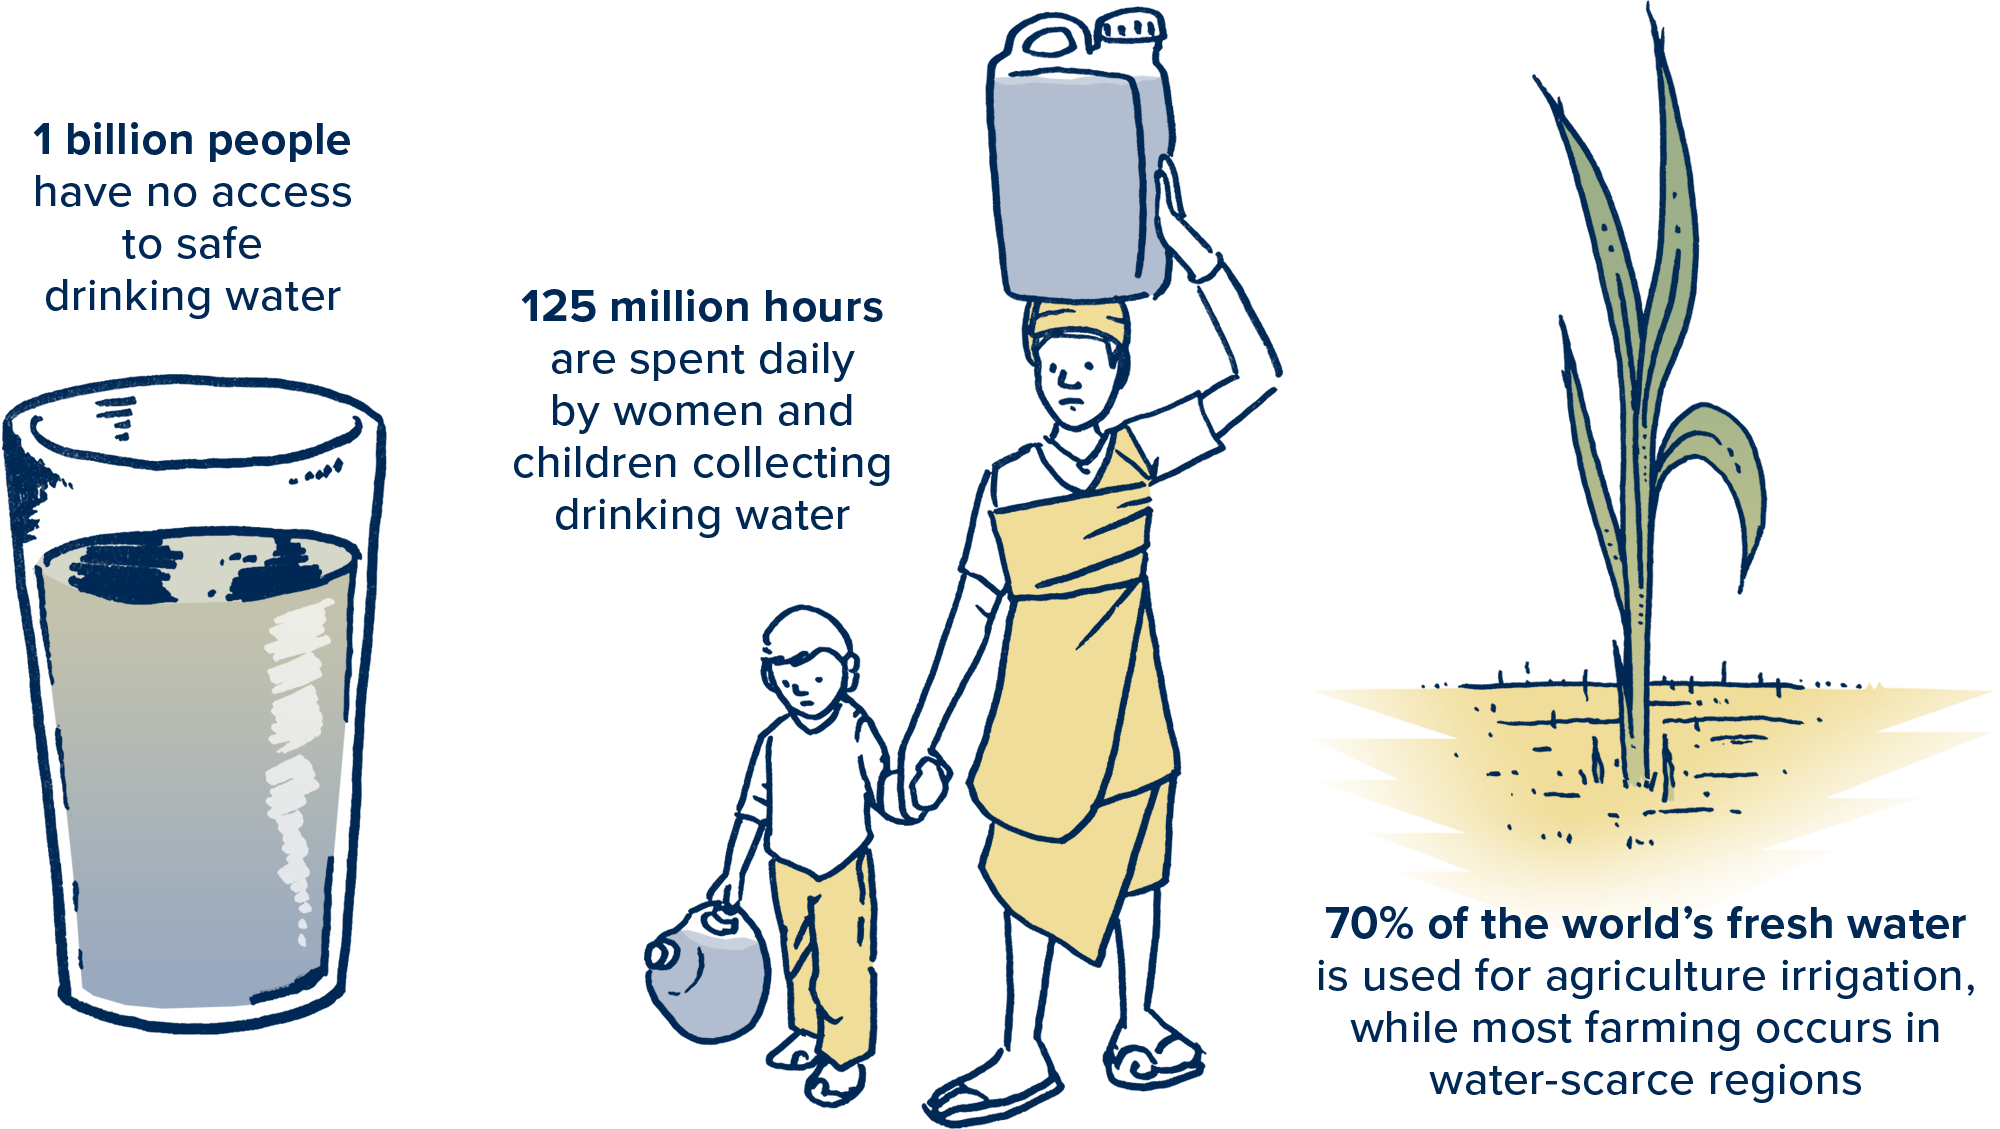 Safe access to drinking water for all, solving the global water crisis with water conservation and research from UC Davis and california drought applications globally.